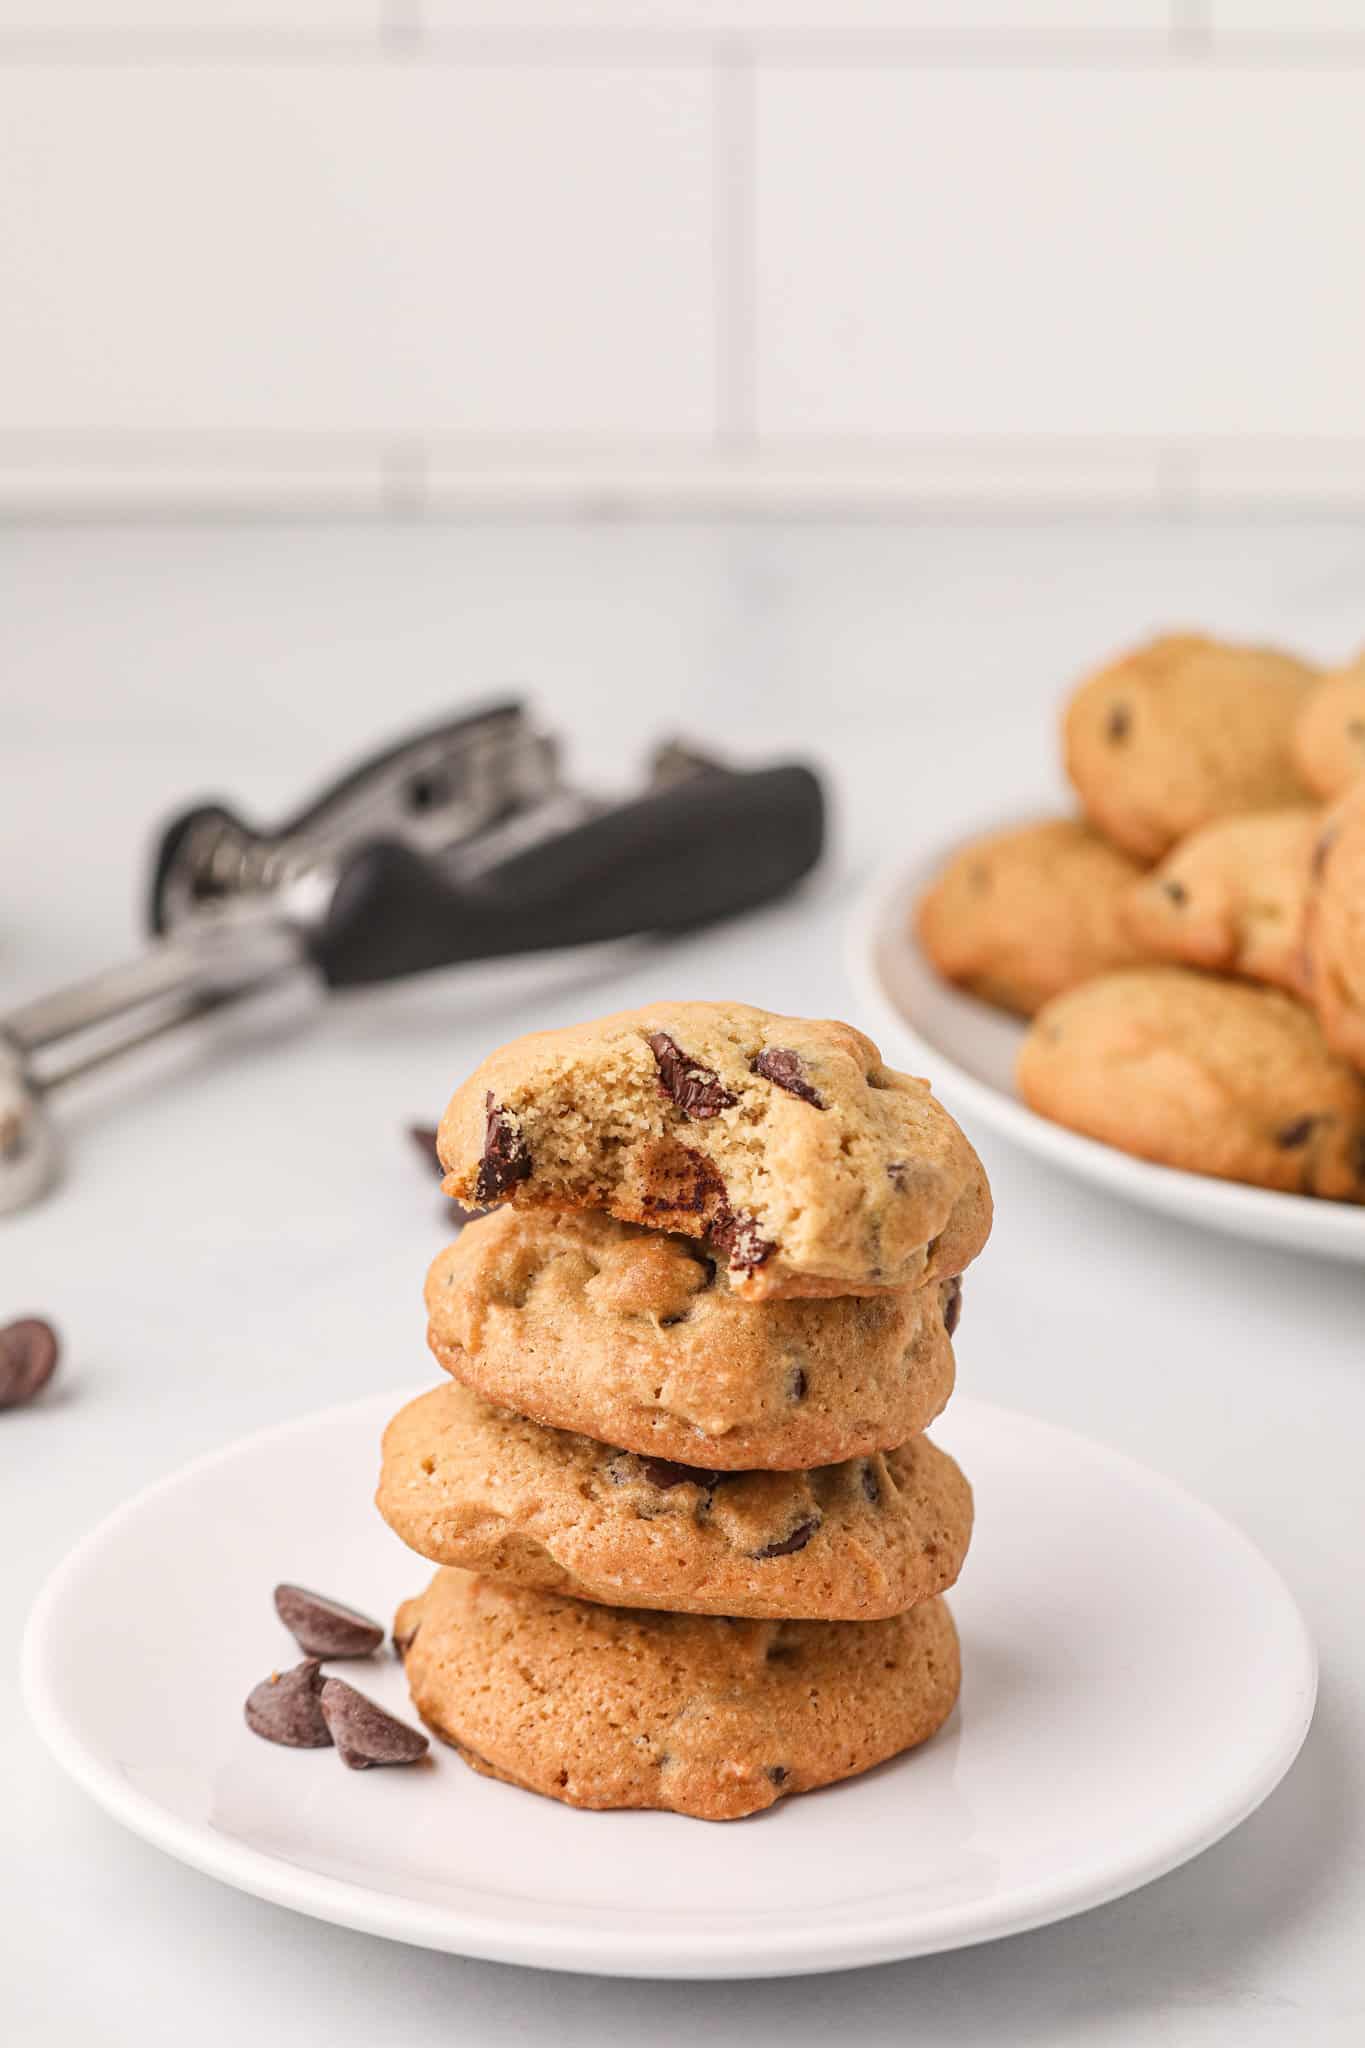 Air Fryer Chocolate Chip Cookies are soft and chewy cookies loaded with chocolate chips.